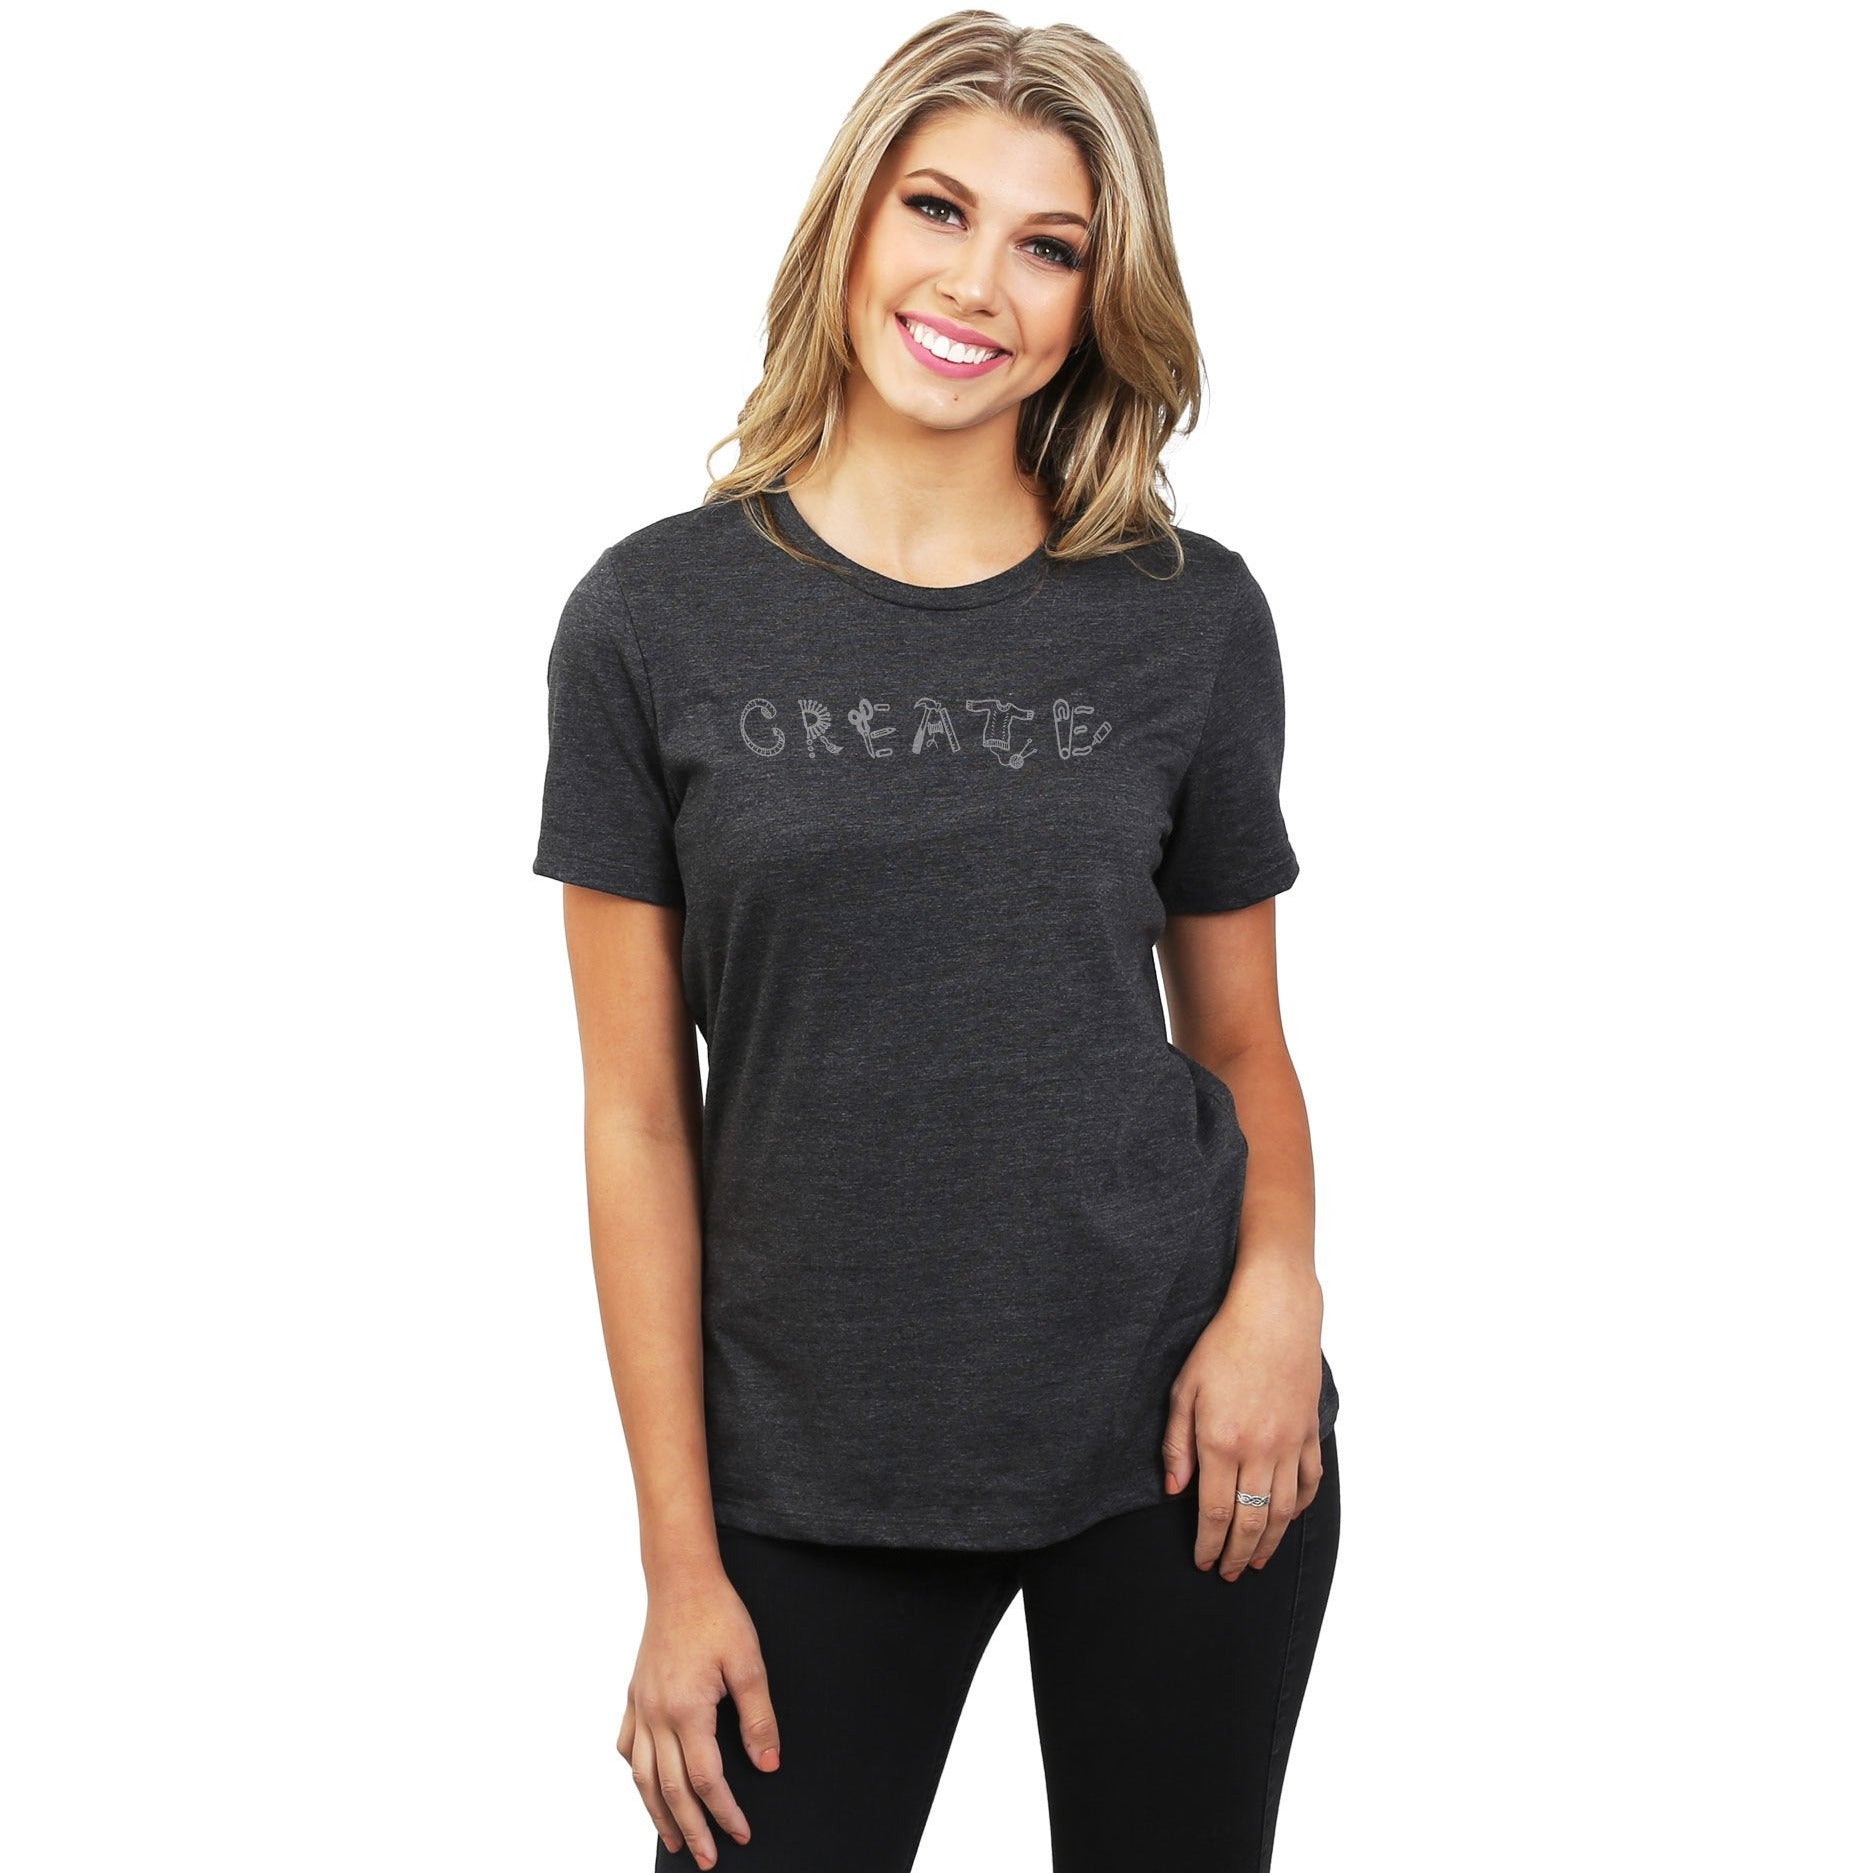 Create Women's Relaxed Crewneck T-Shirt Top Tee Charcoal Model
